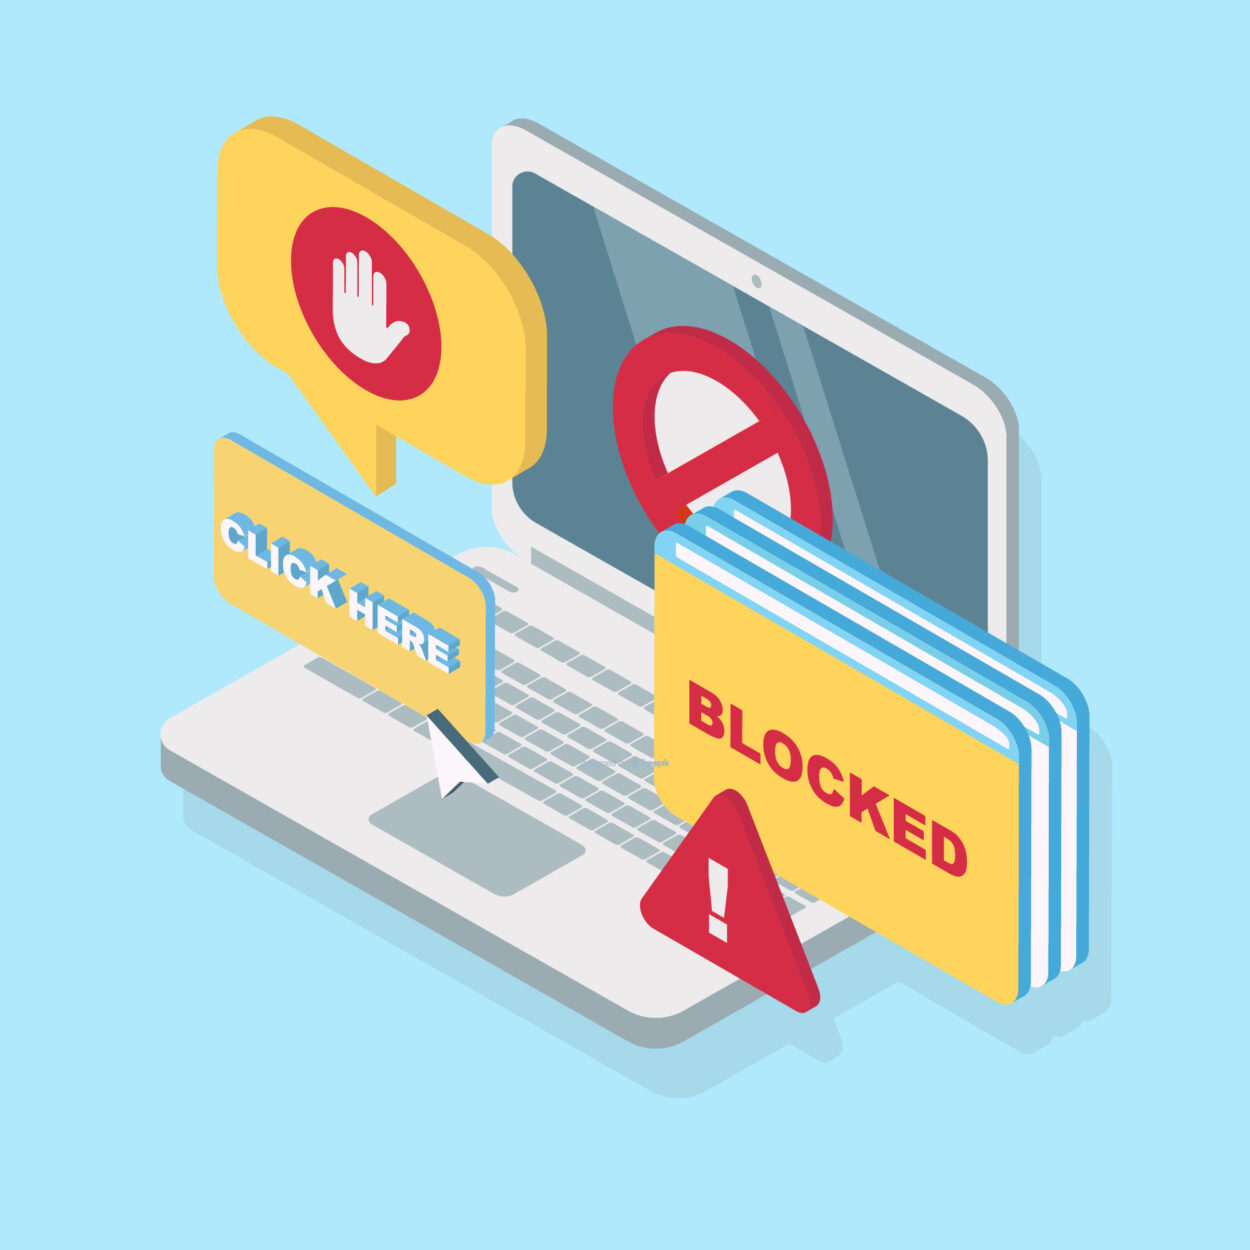 Click here and Blocked options and a laptop with a stop/blocked sign